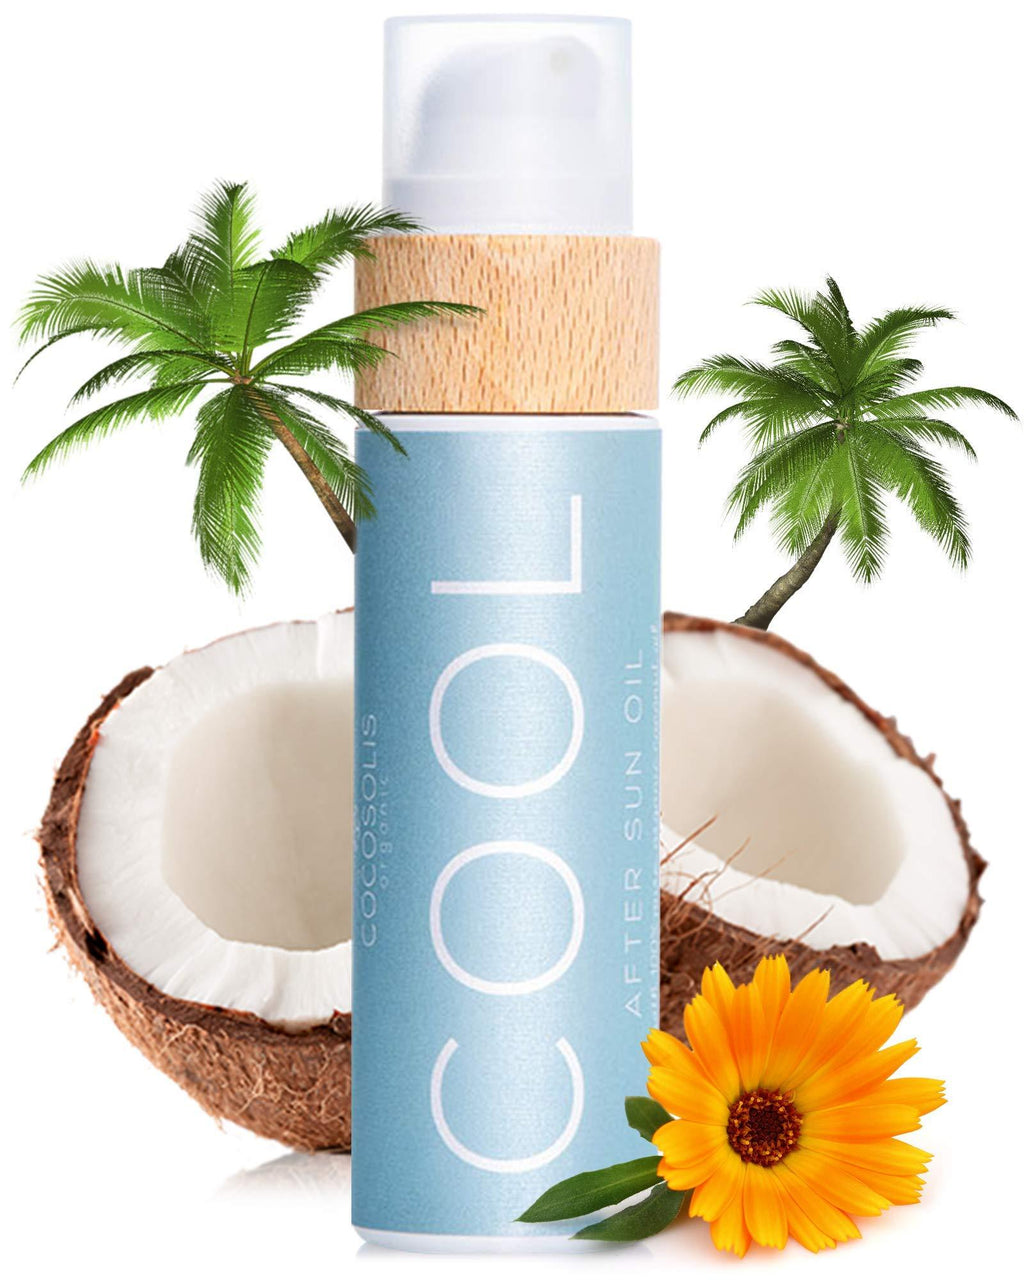 COCOSOLIS COOL After Sun Oil | Organic Oil for Tender Hydration and Recovery After Sun | Moisturising, Revitalising & Nourishing the Skin | 9 Raw Organic Oils for Smooth & Elastic Skin - NewNest Australia